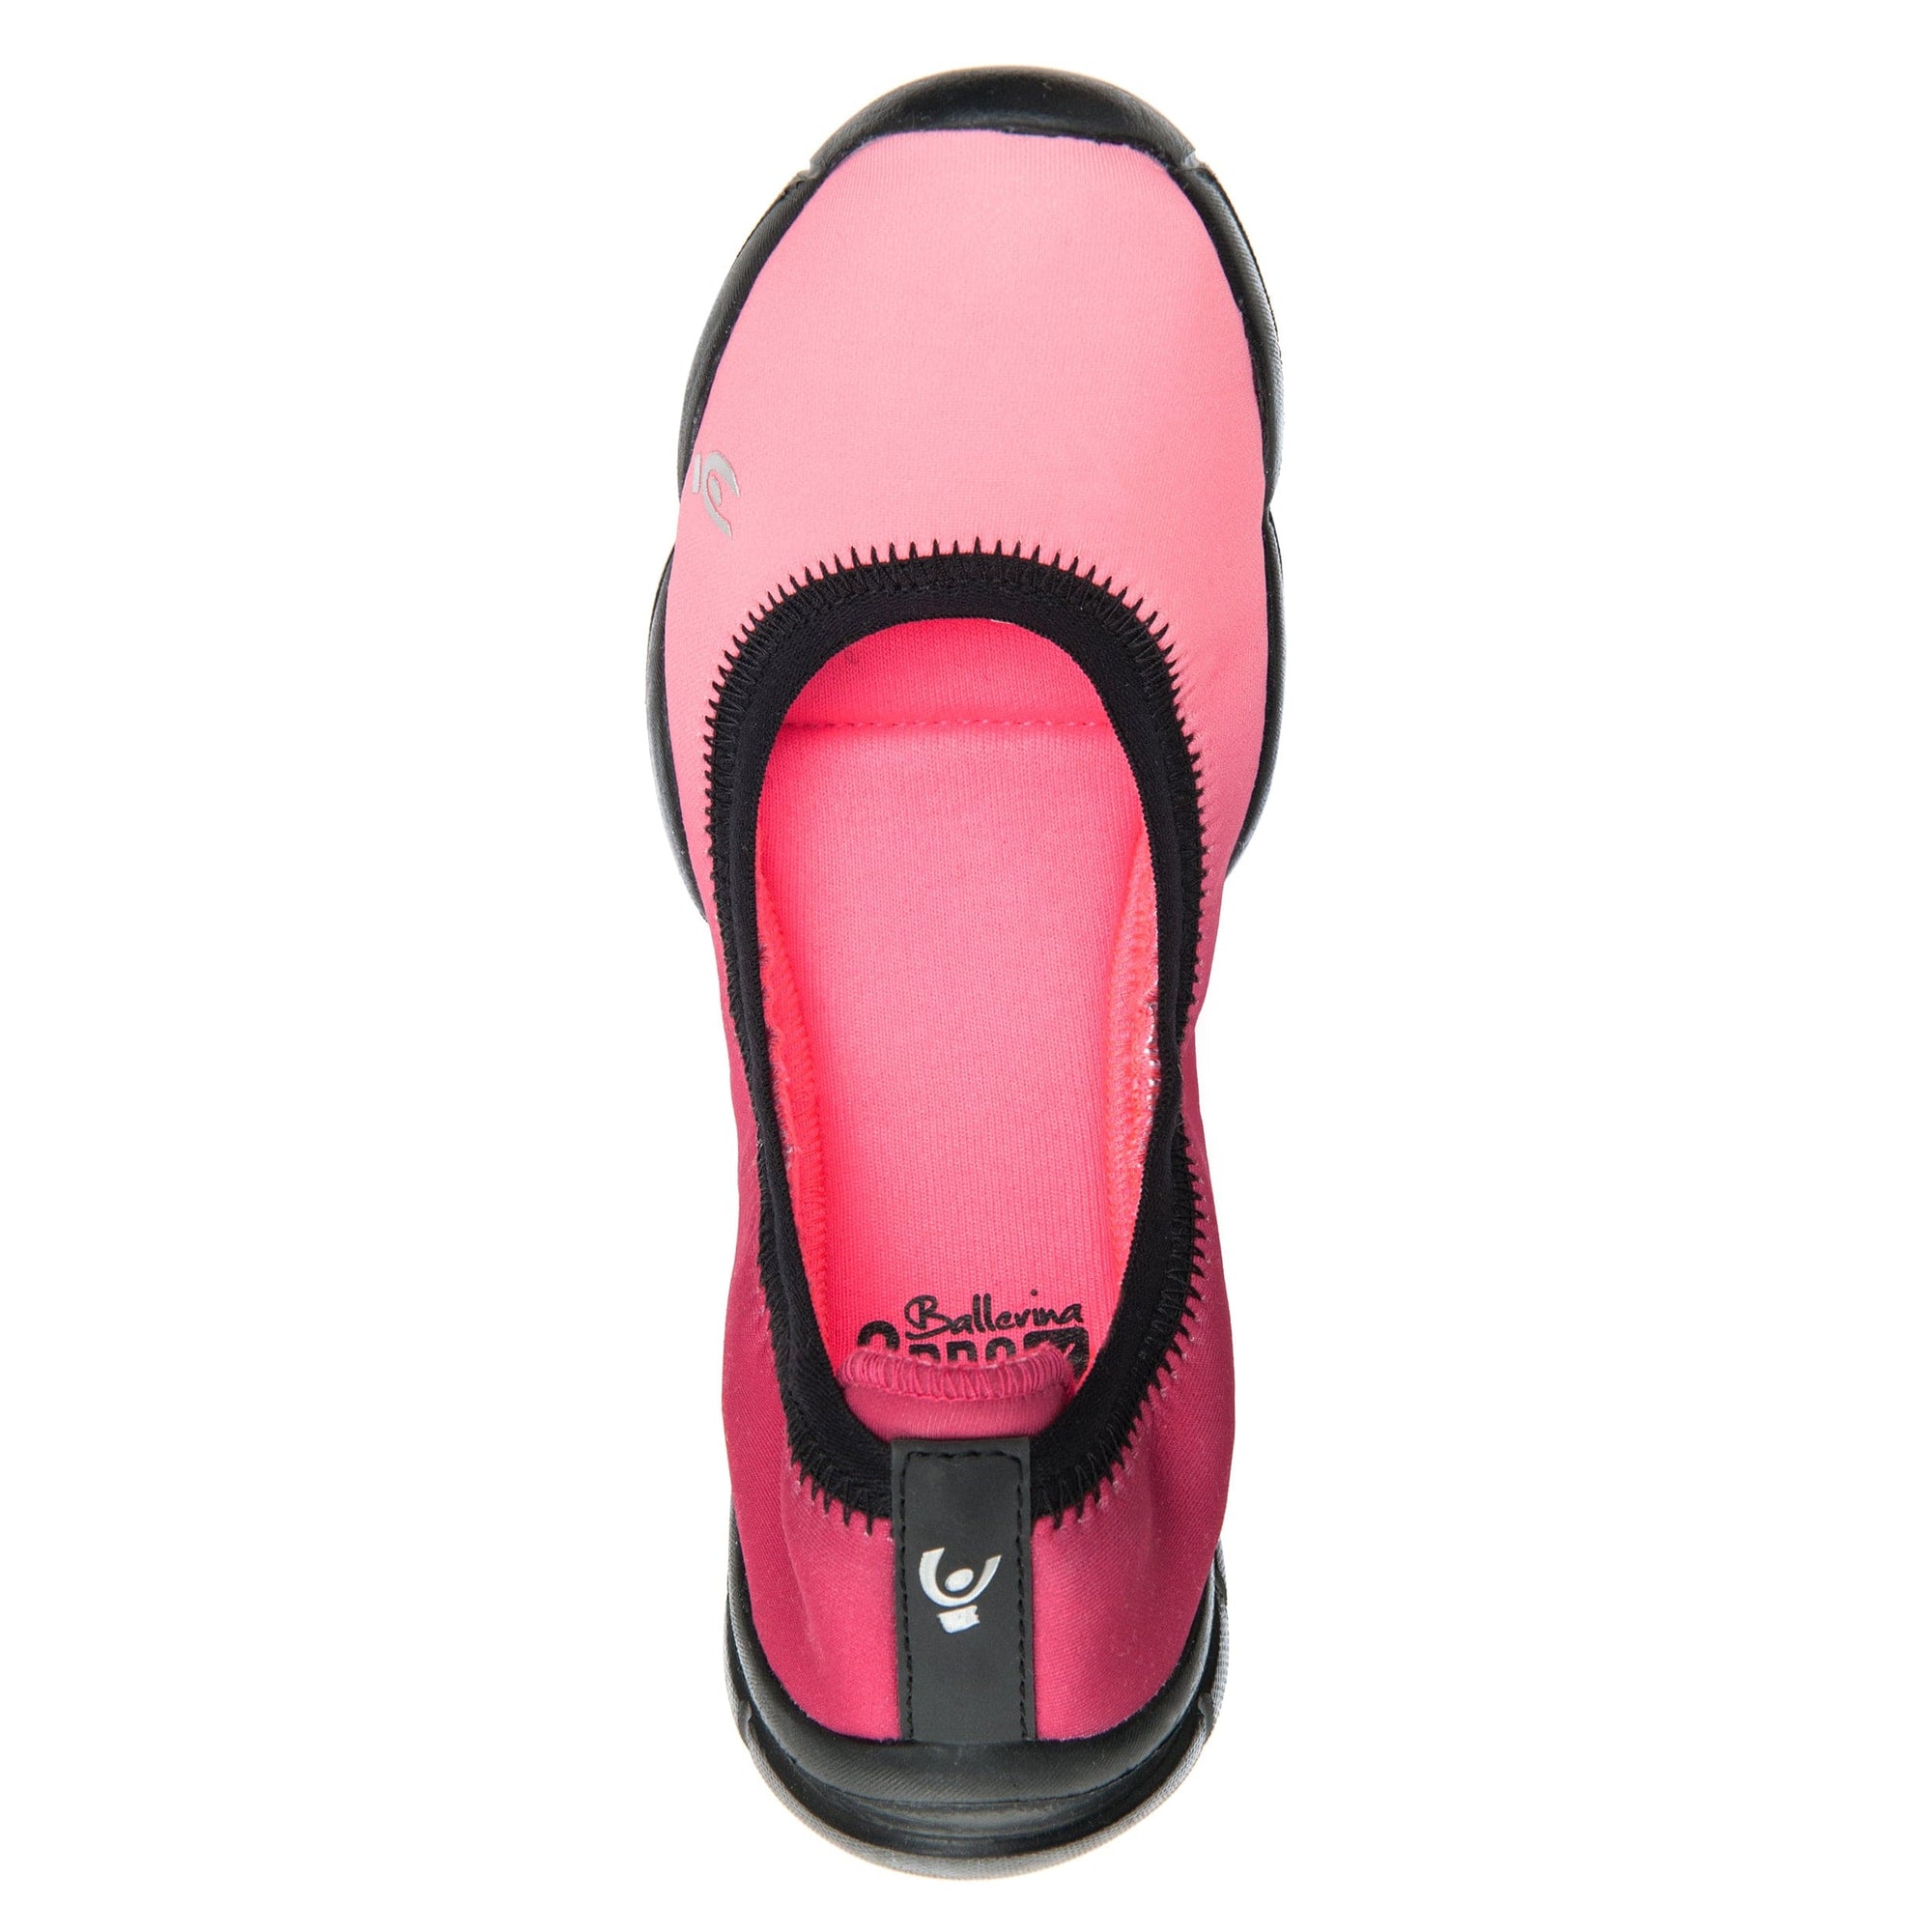 3Pro Ballerina Shoes - Pink 3